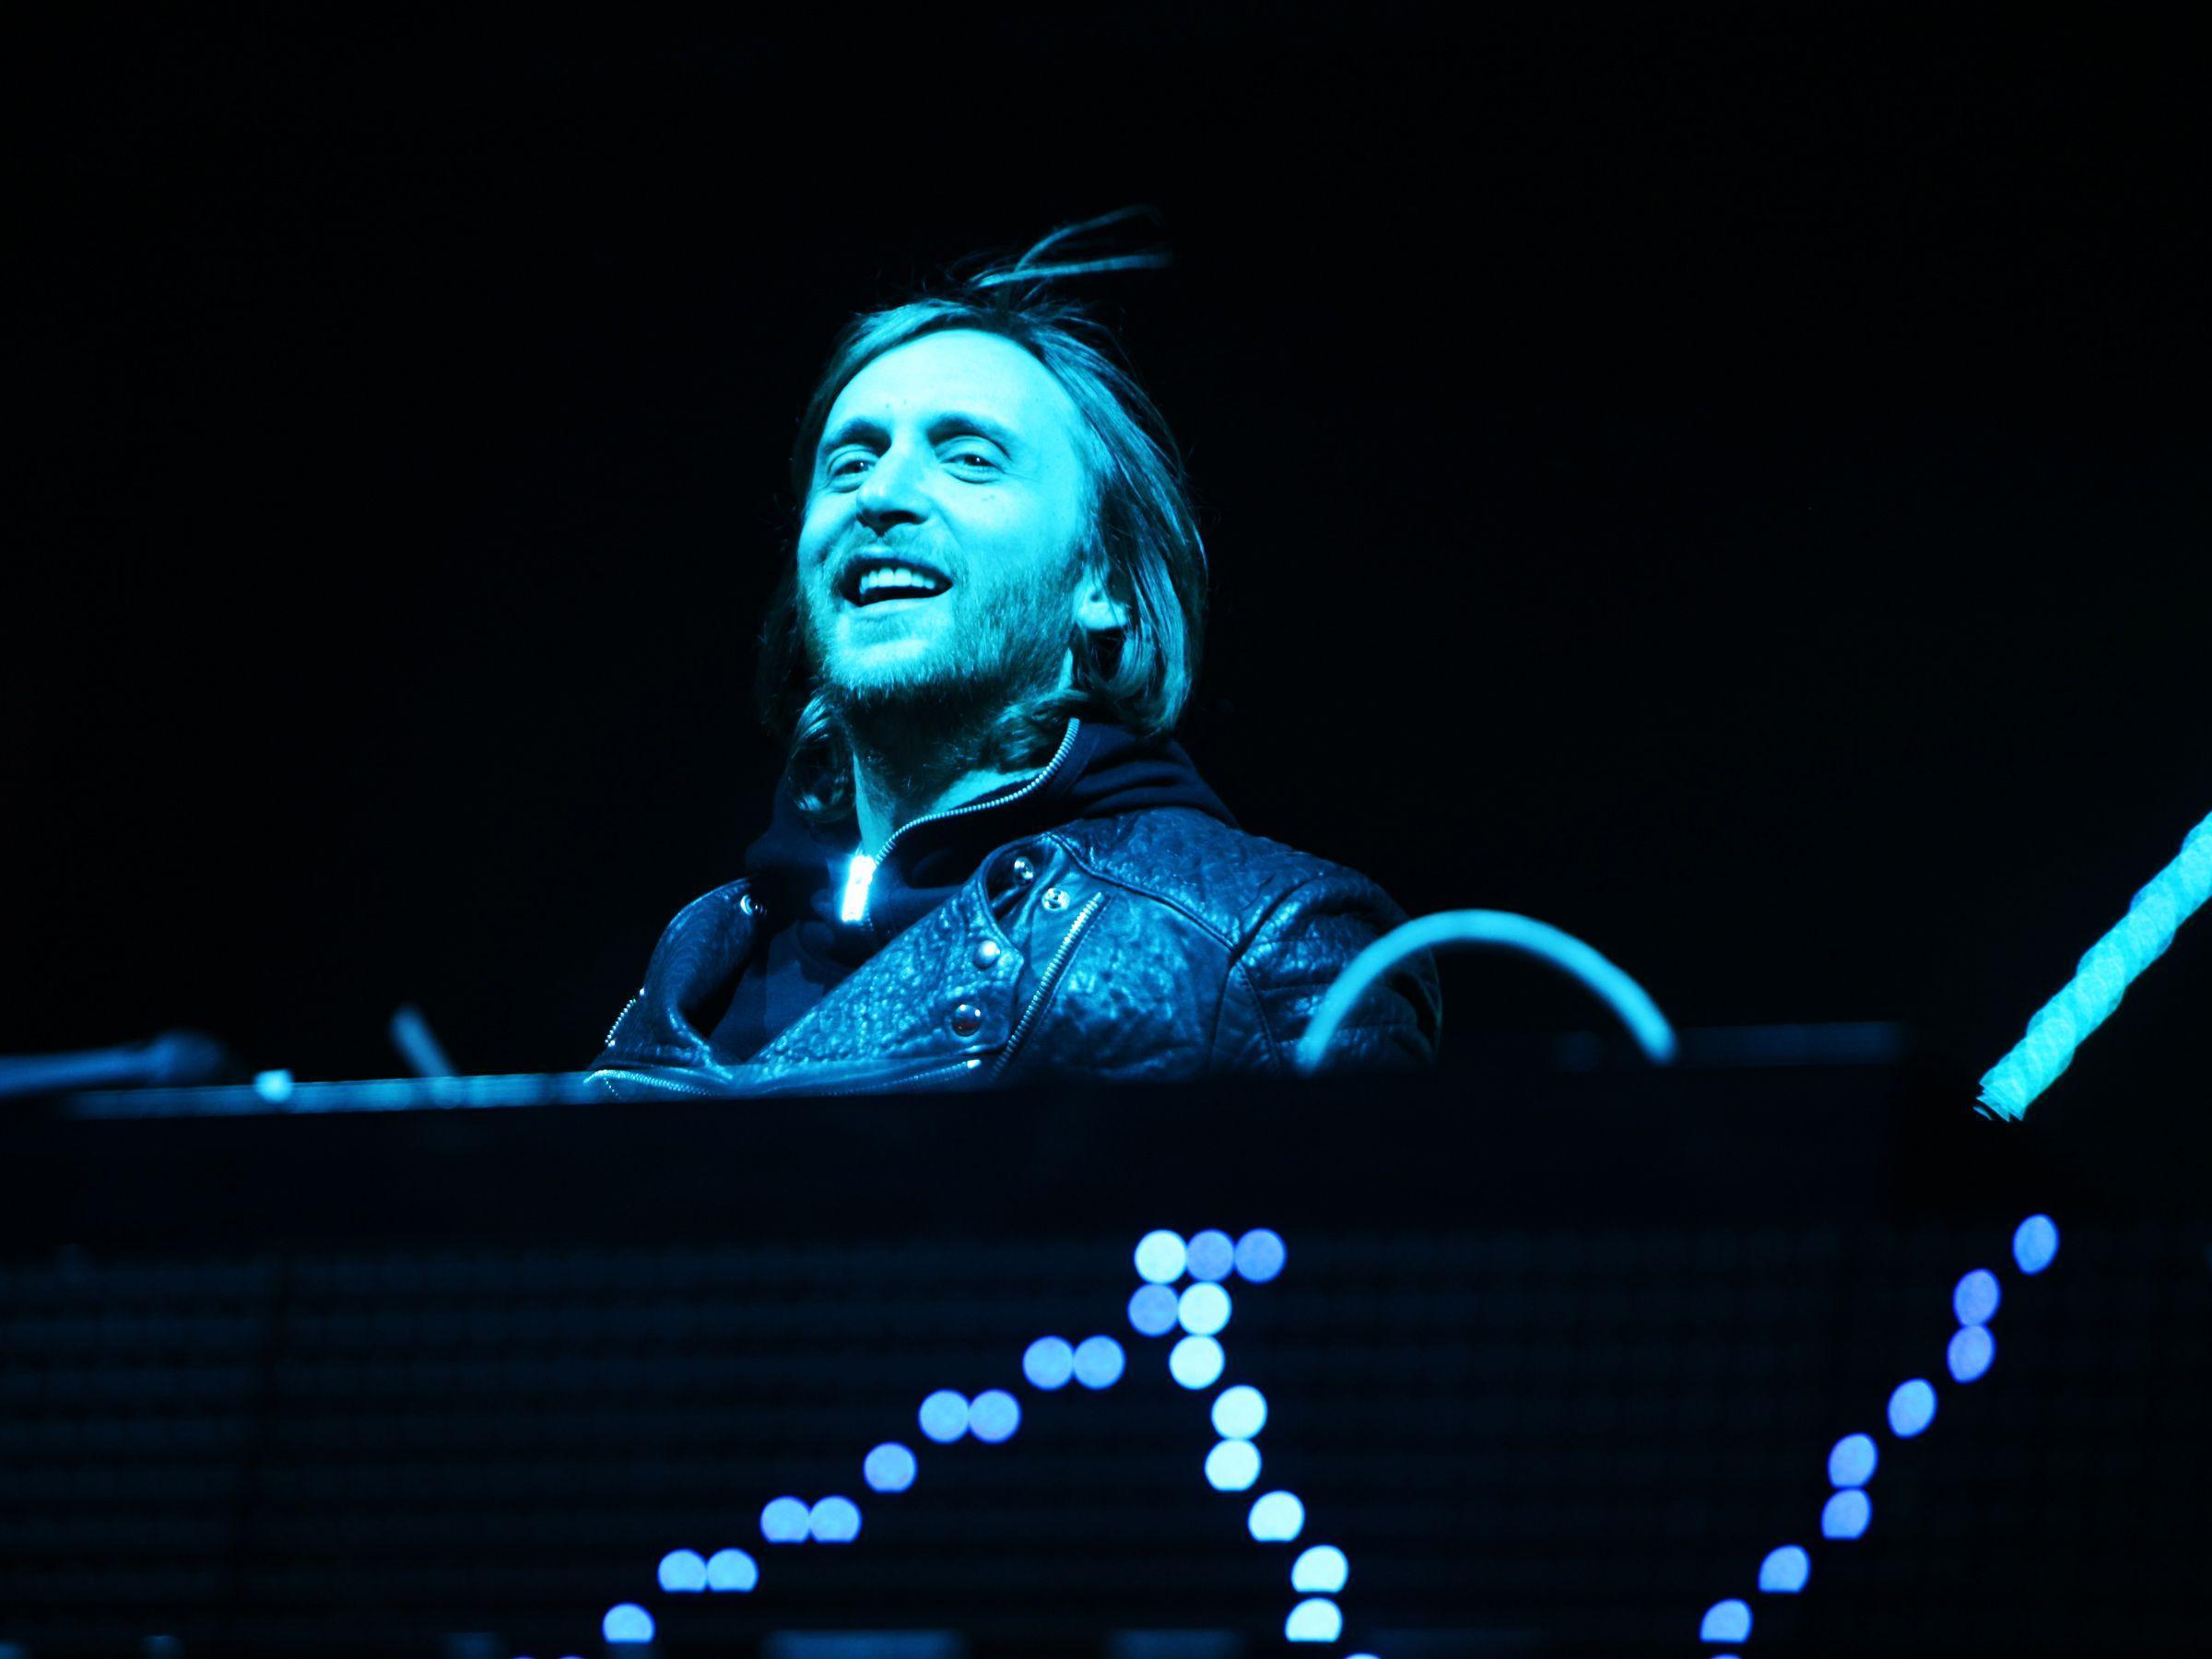 David Guetta laughs wallpaper and image, picture, photo